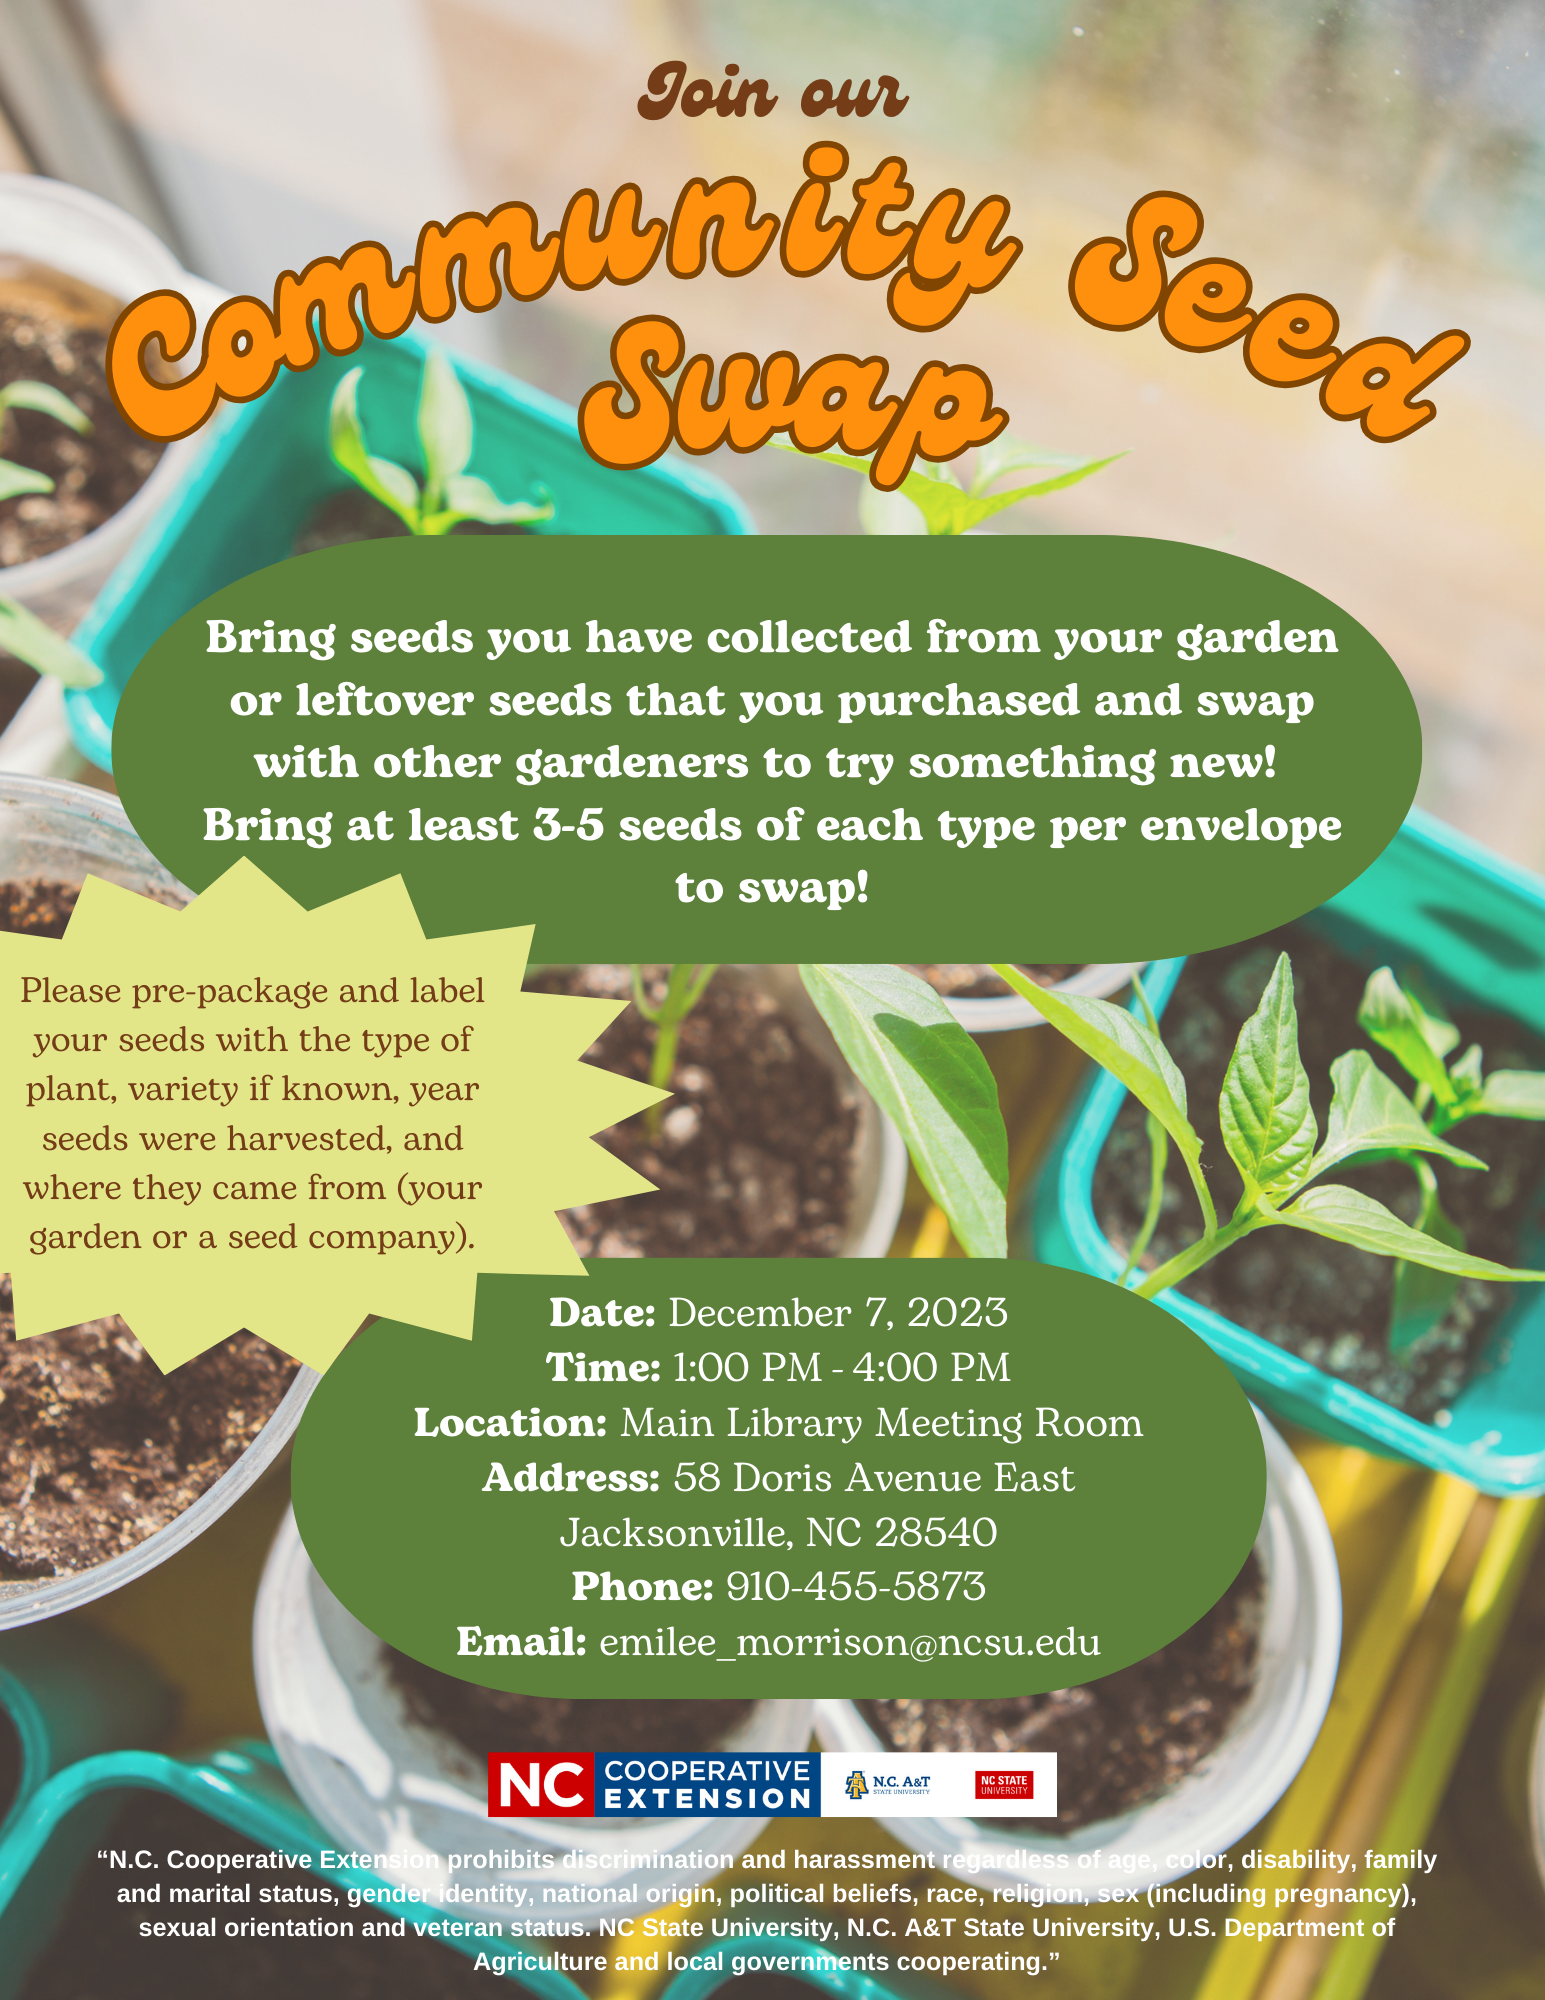 This is the Community Seed Swap Flyer